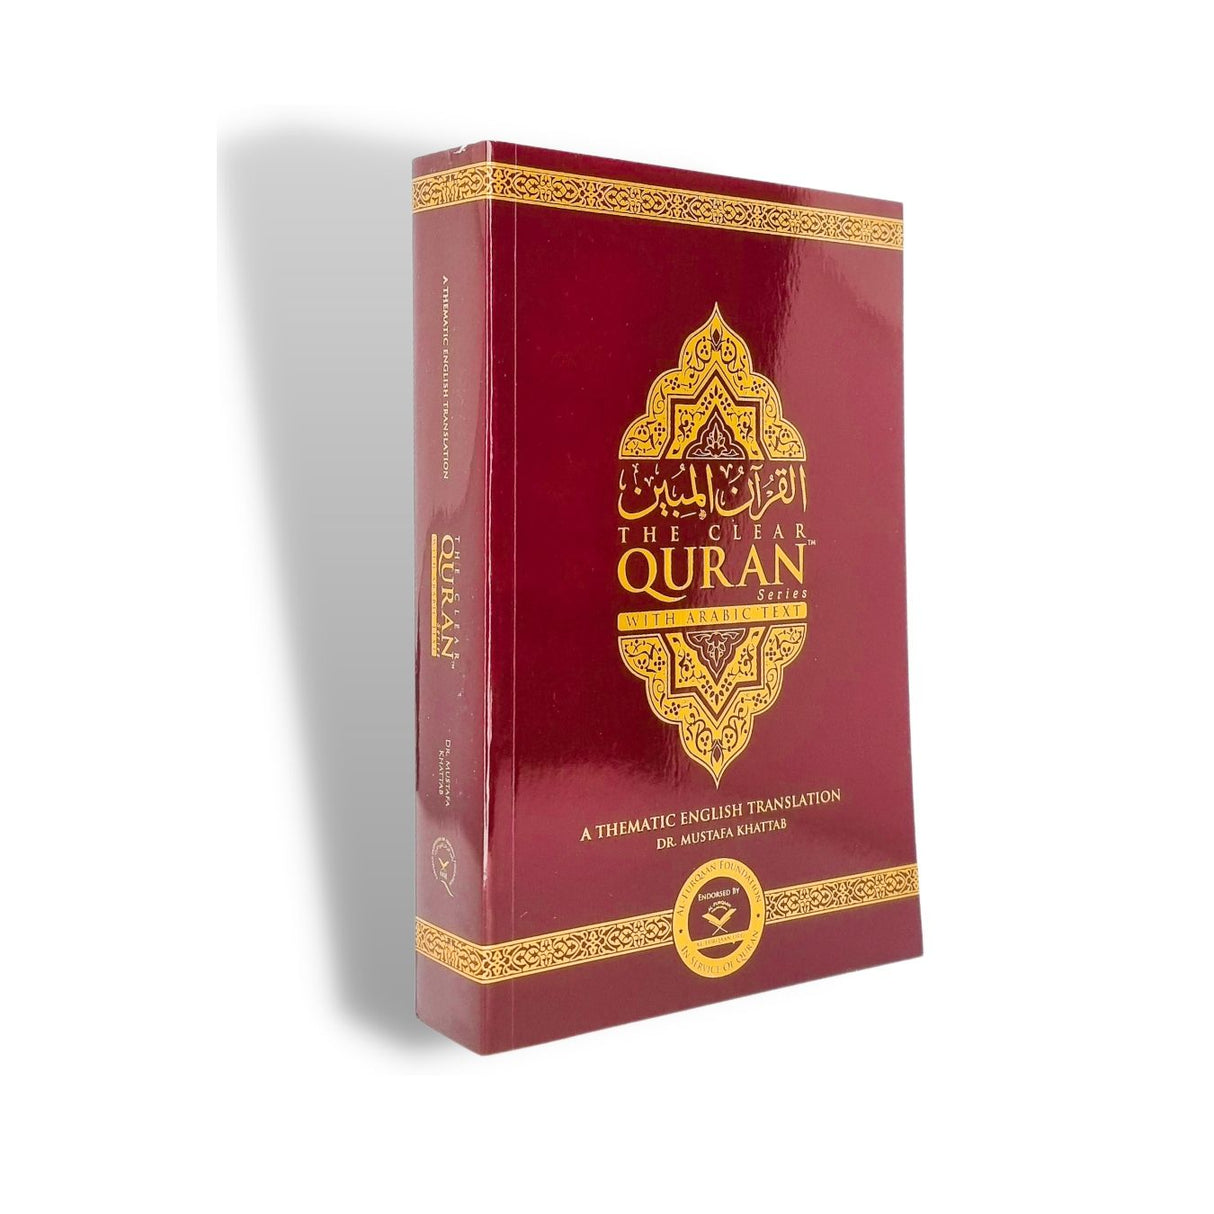 The Clear Quran with Arabic Text